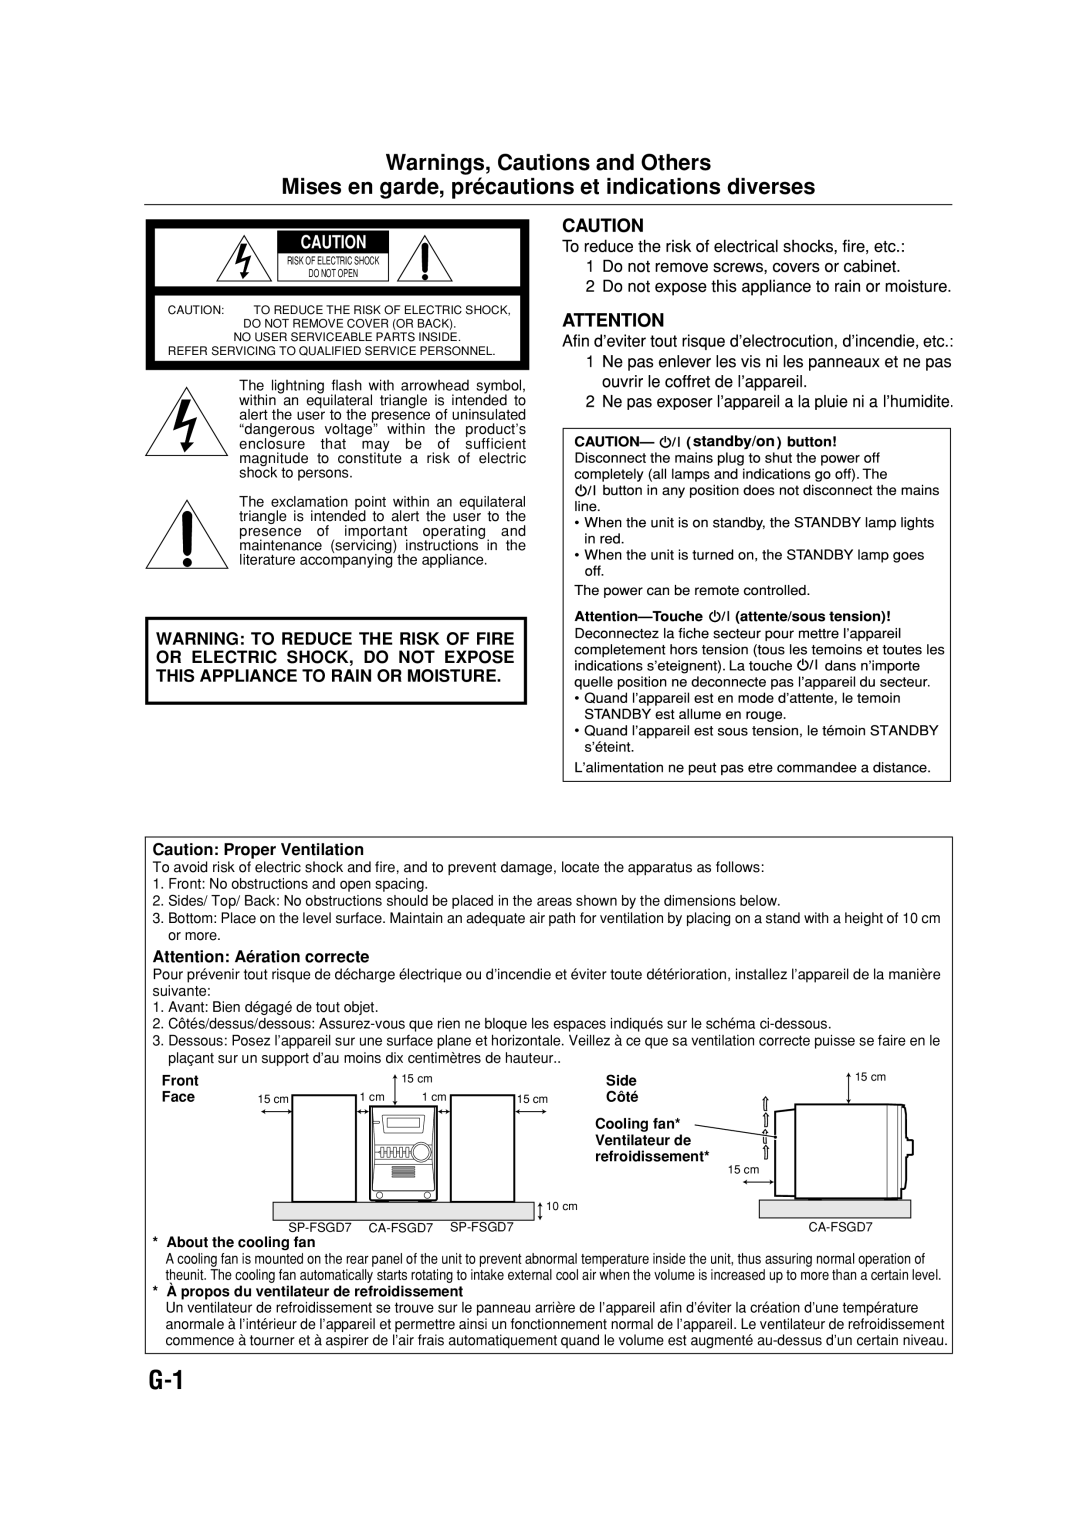 JVC SP-FSGD7 Warnings, Cautions and Others, Warning: To Reduce The Risk Of Fire, Or Electric Shock, Do Not Expose, Front 